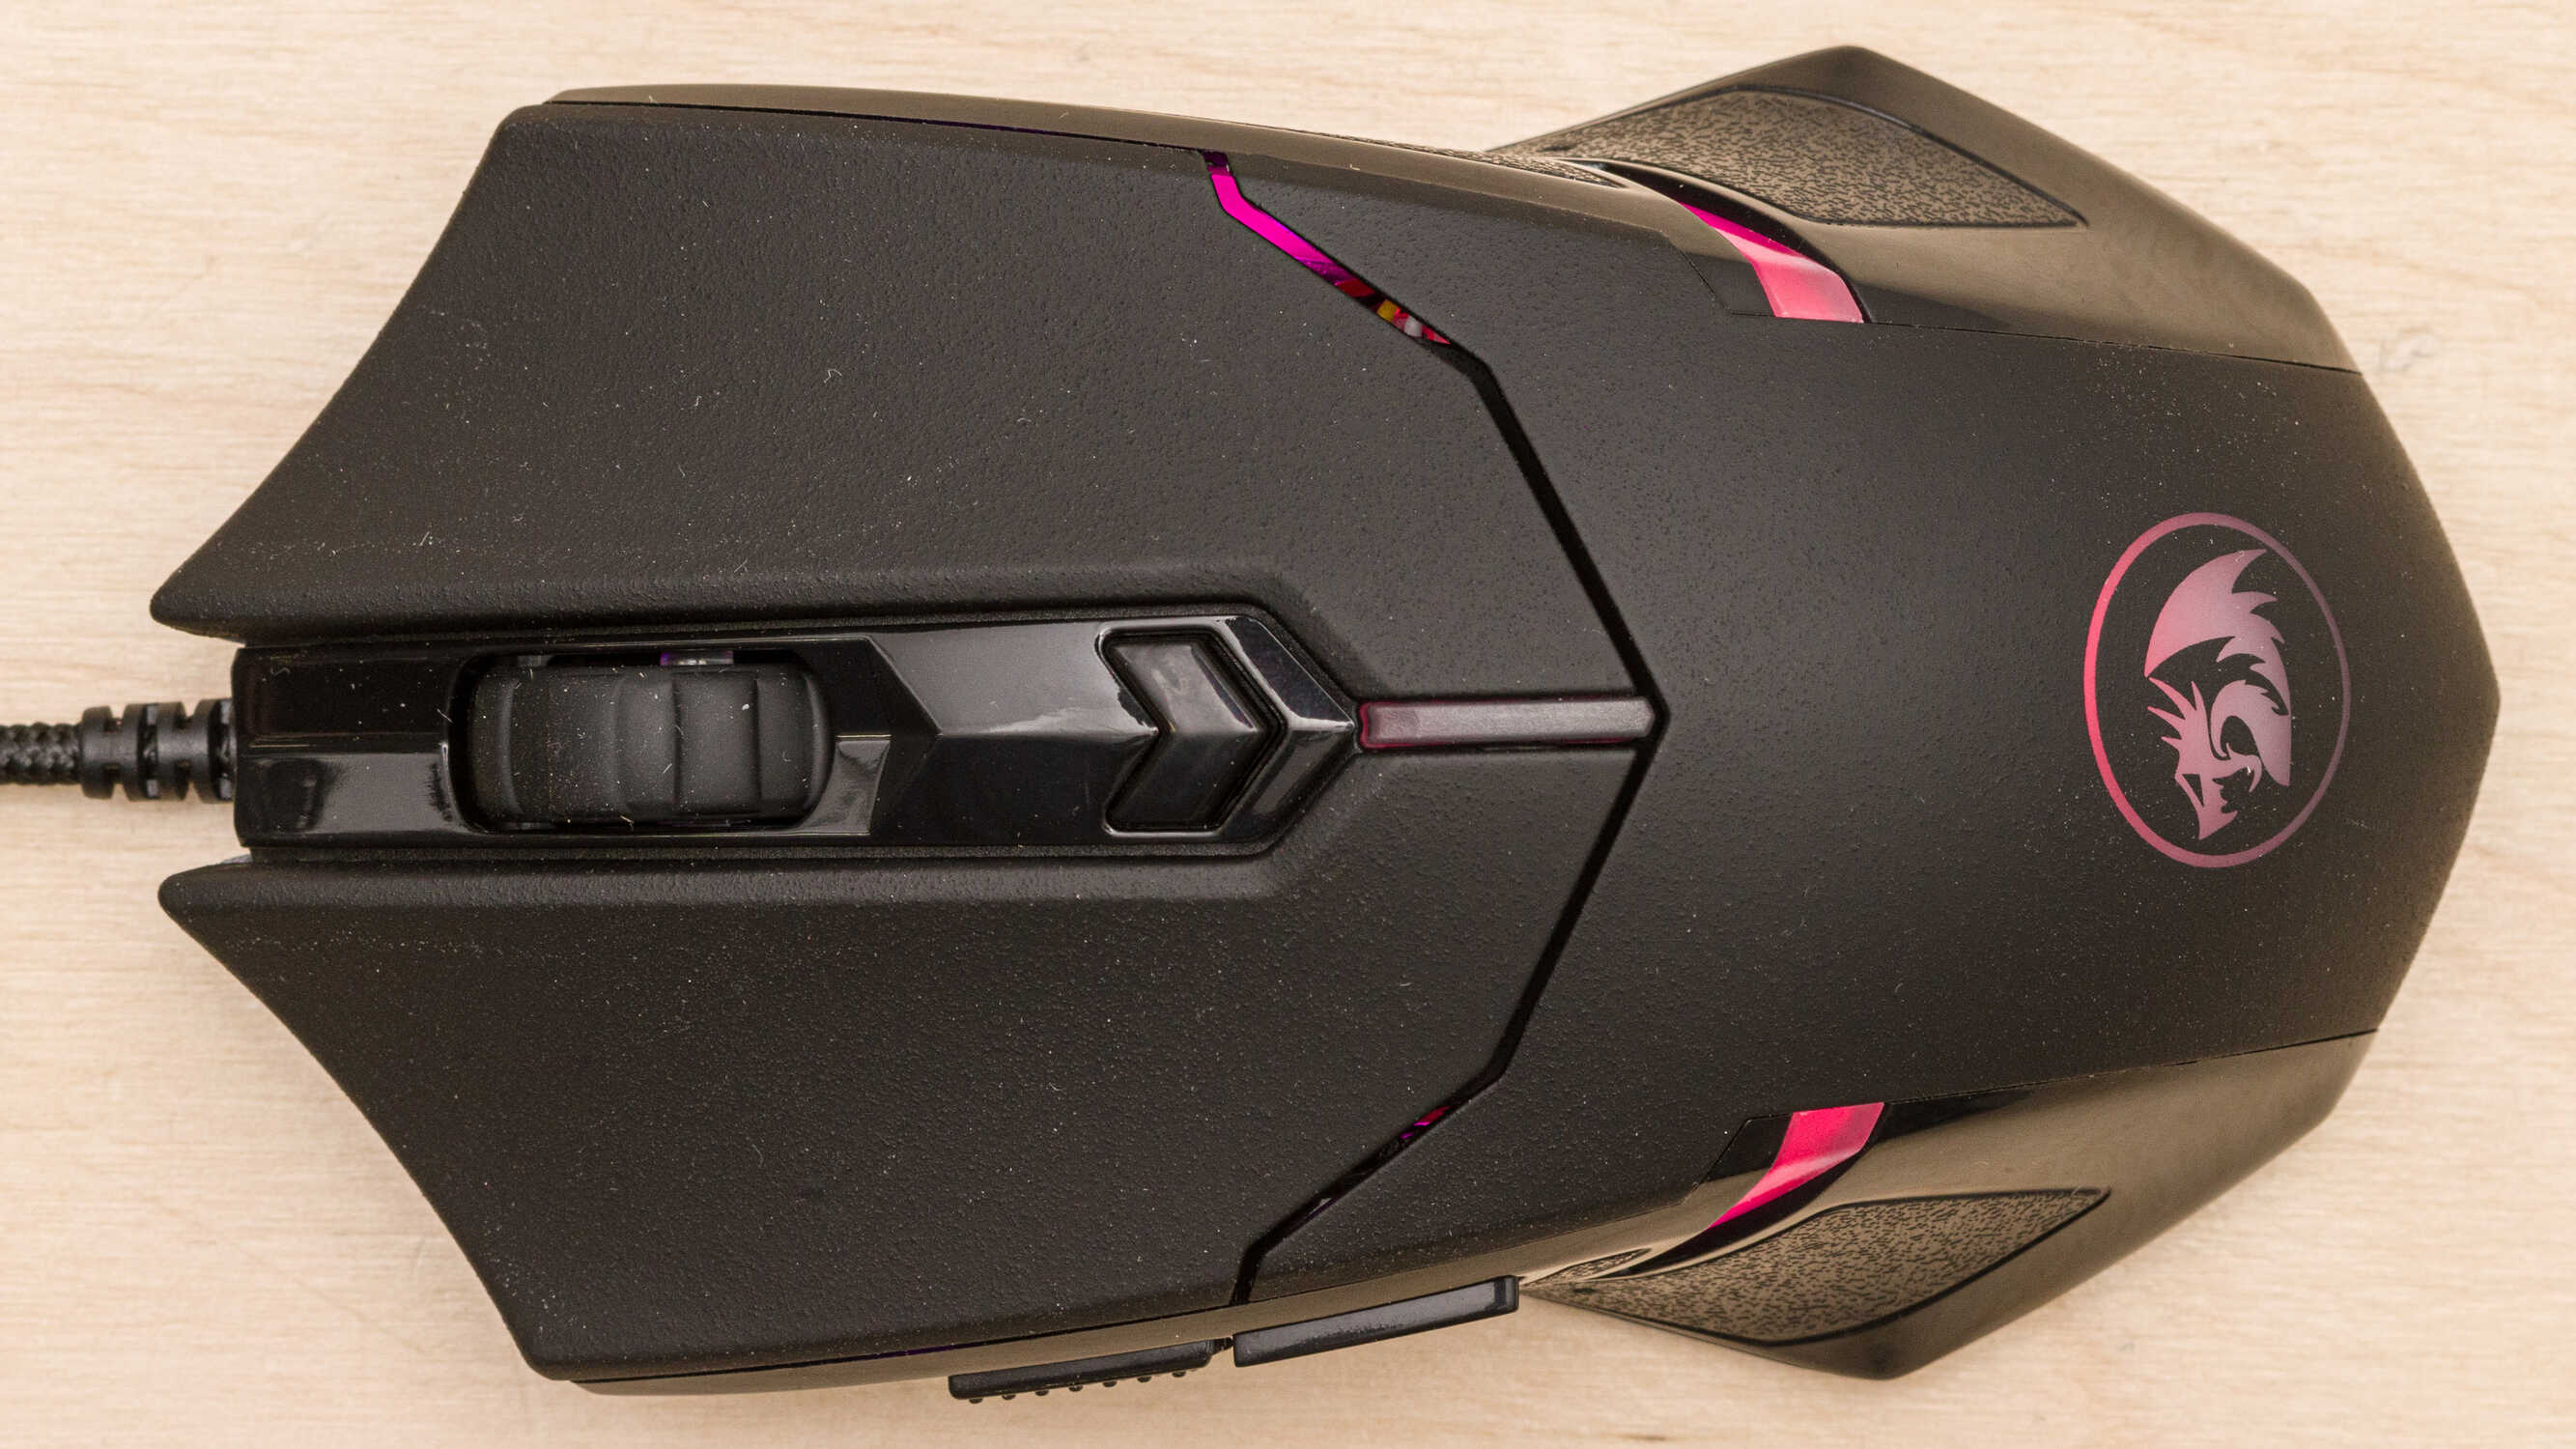 What Is The Software For The Centrophorus Redragon Gaming Mouse